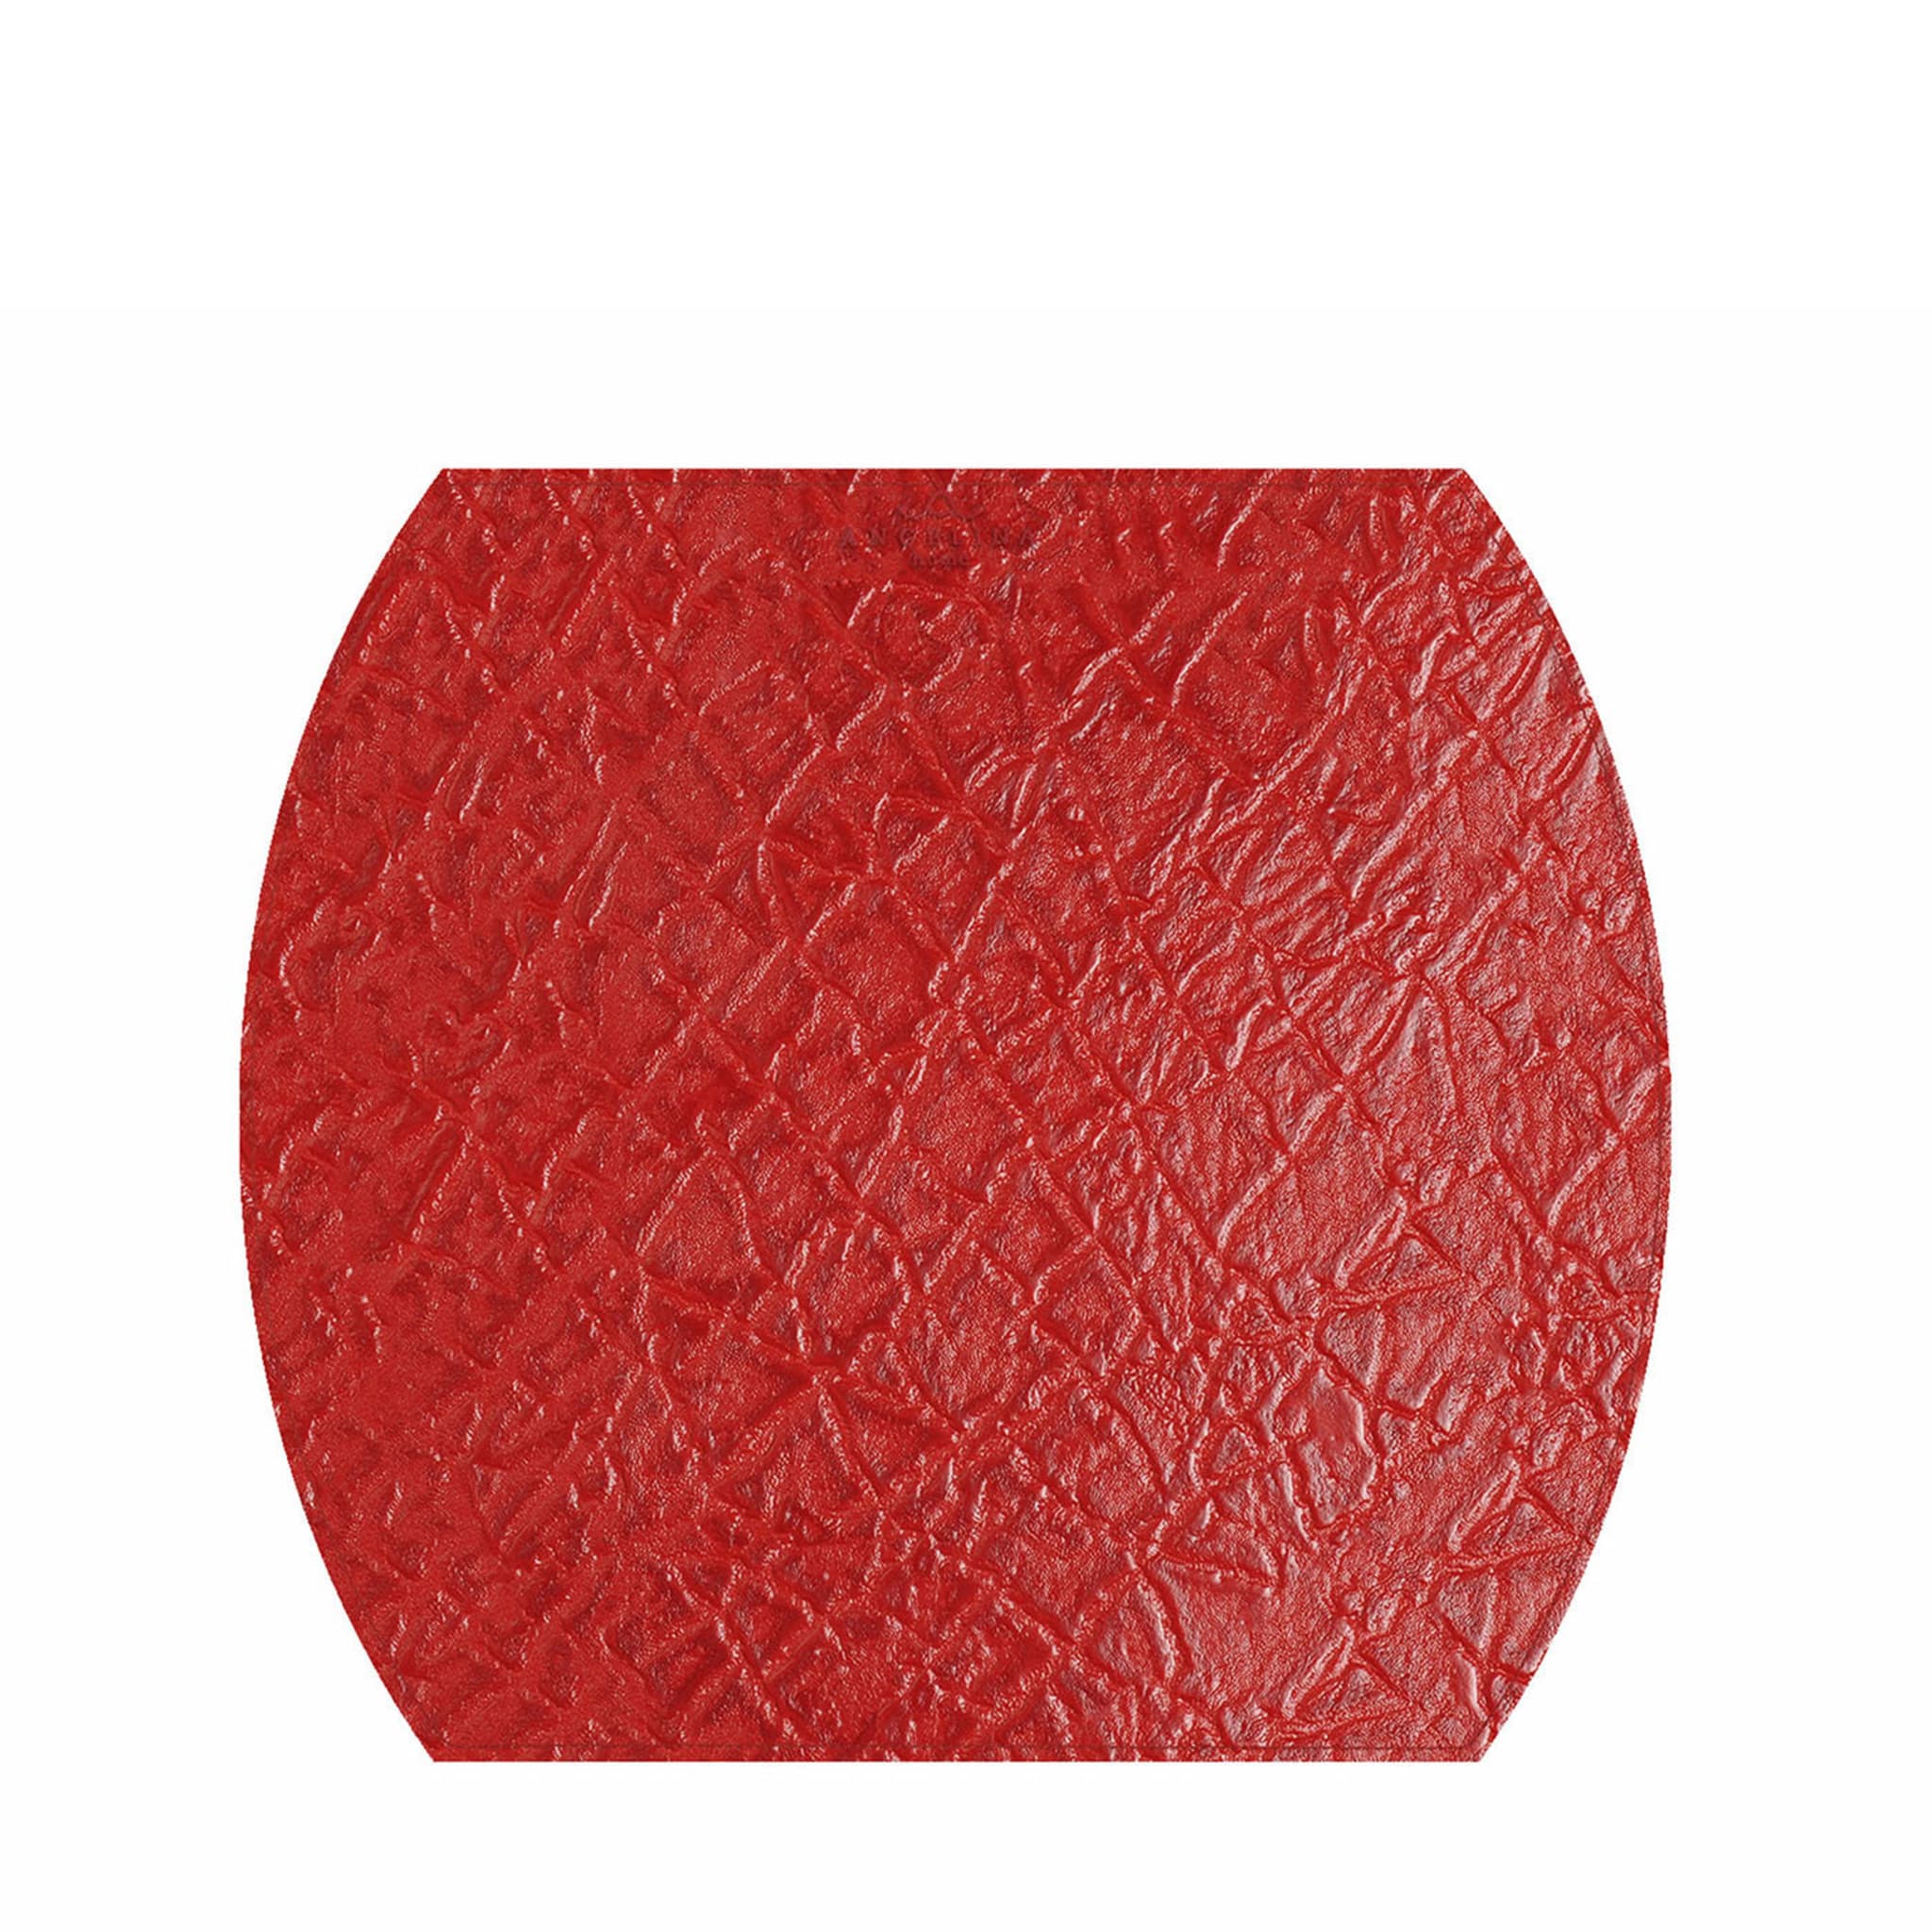 Tanzania Extra-Small Set of 2 Red Leather Placemats - Alternative view 2